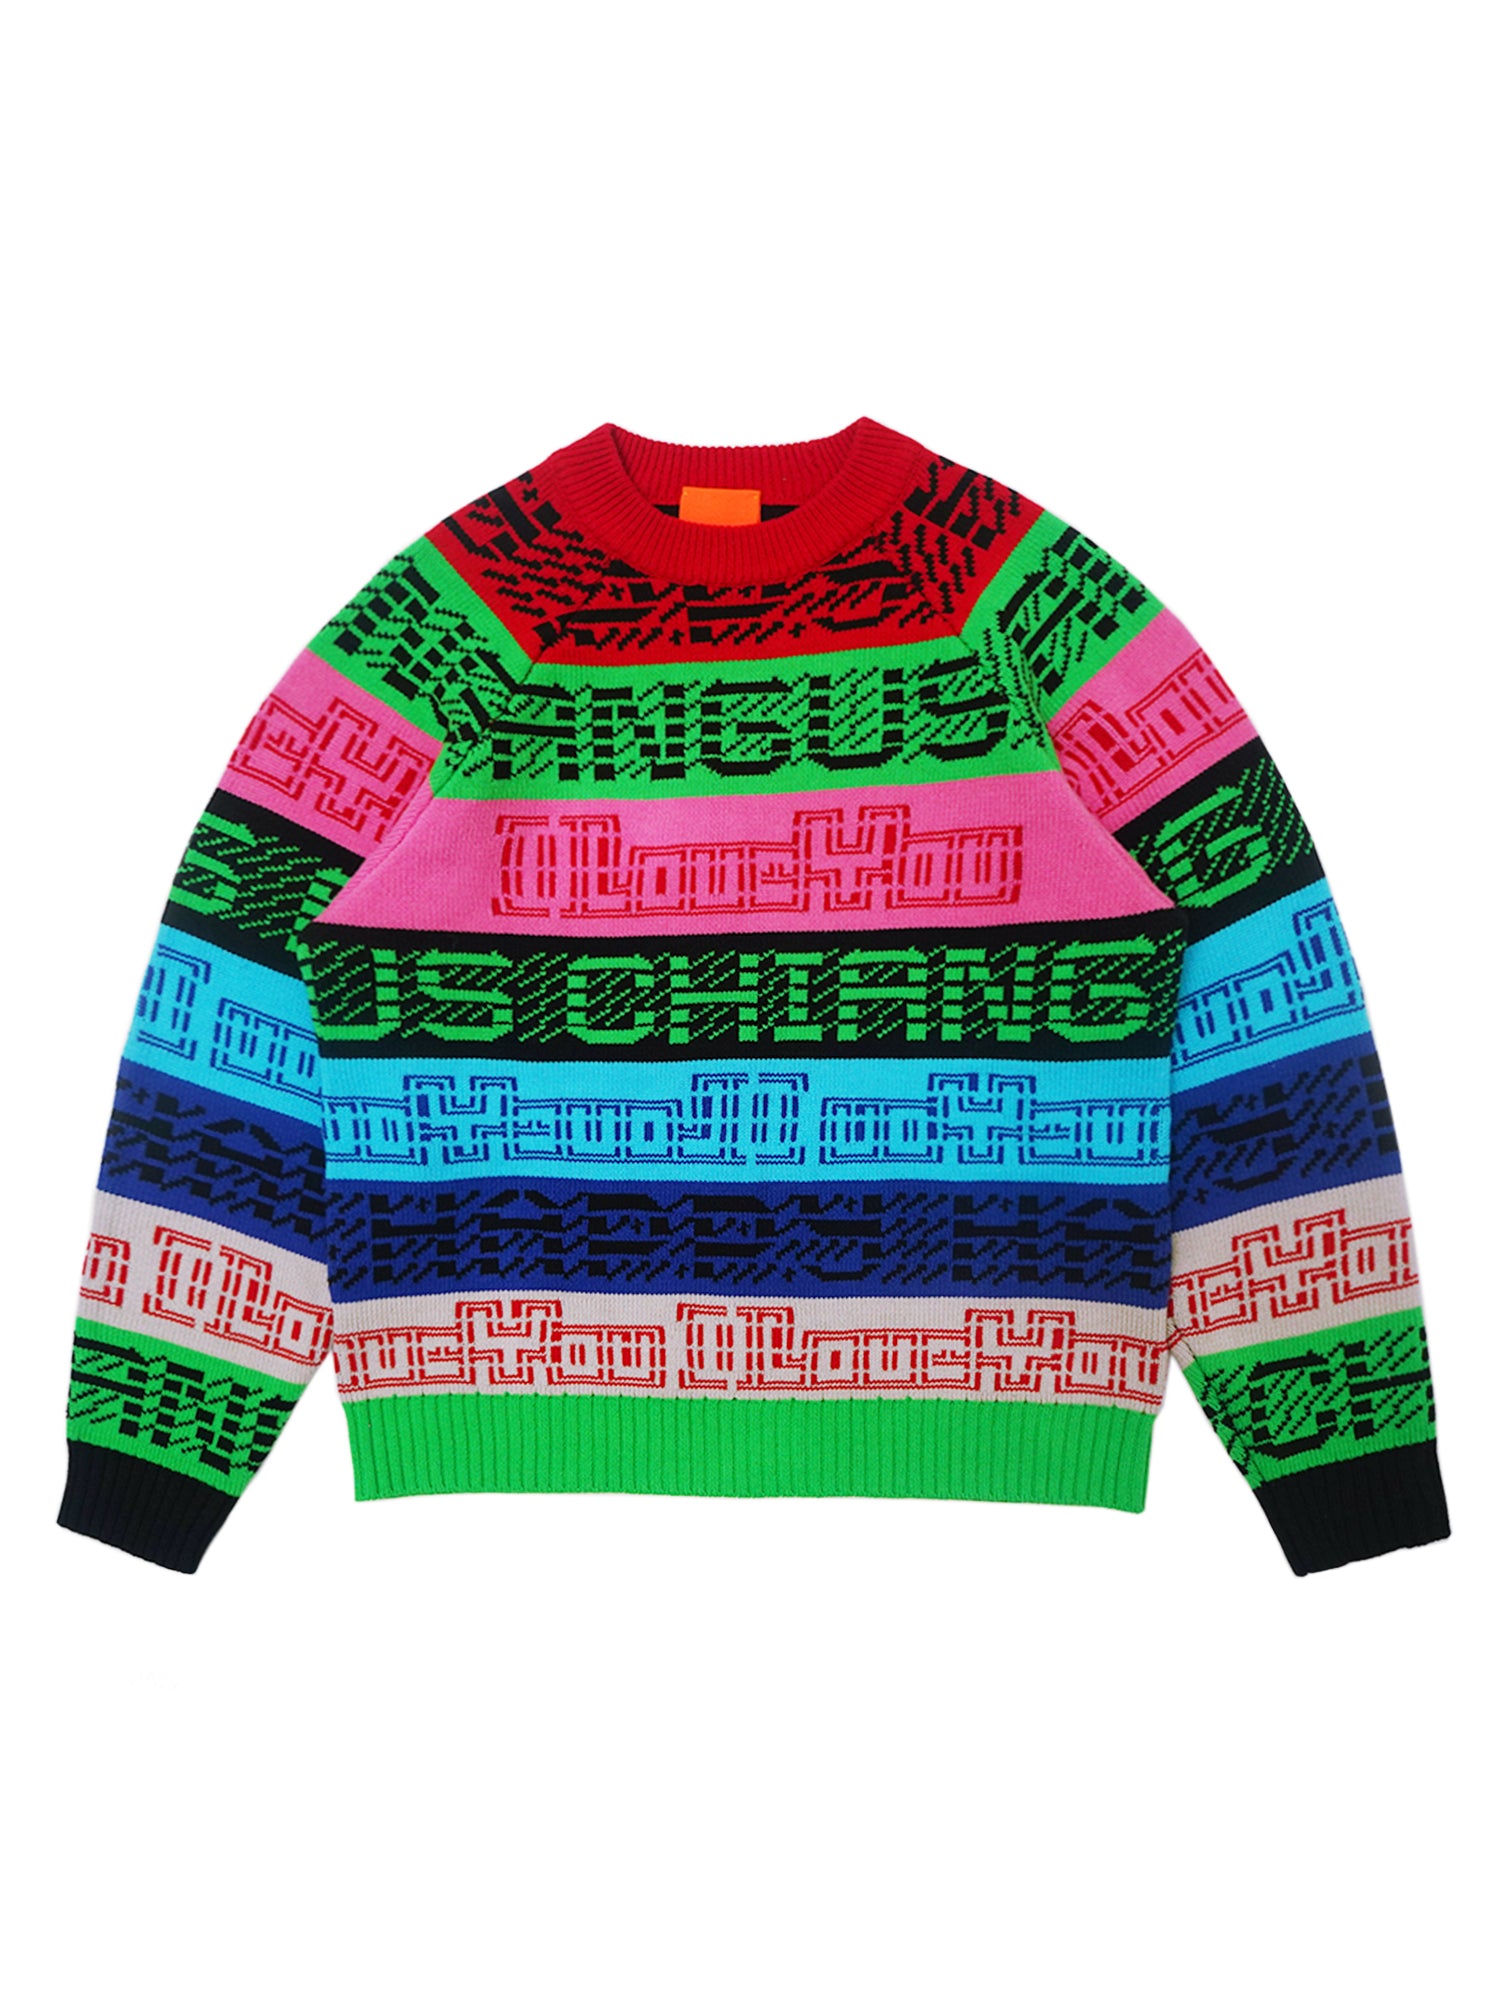 MESSAGE FROM THE FUTURE COLORFUL LOGO STRIPE SWEATER